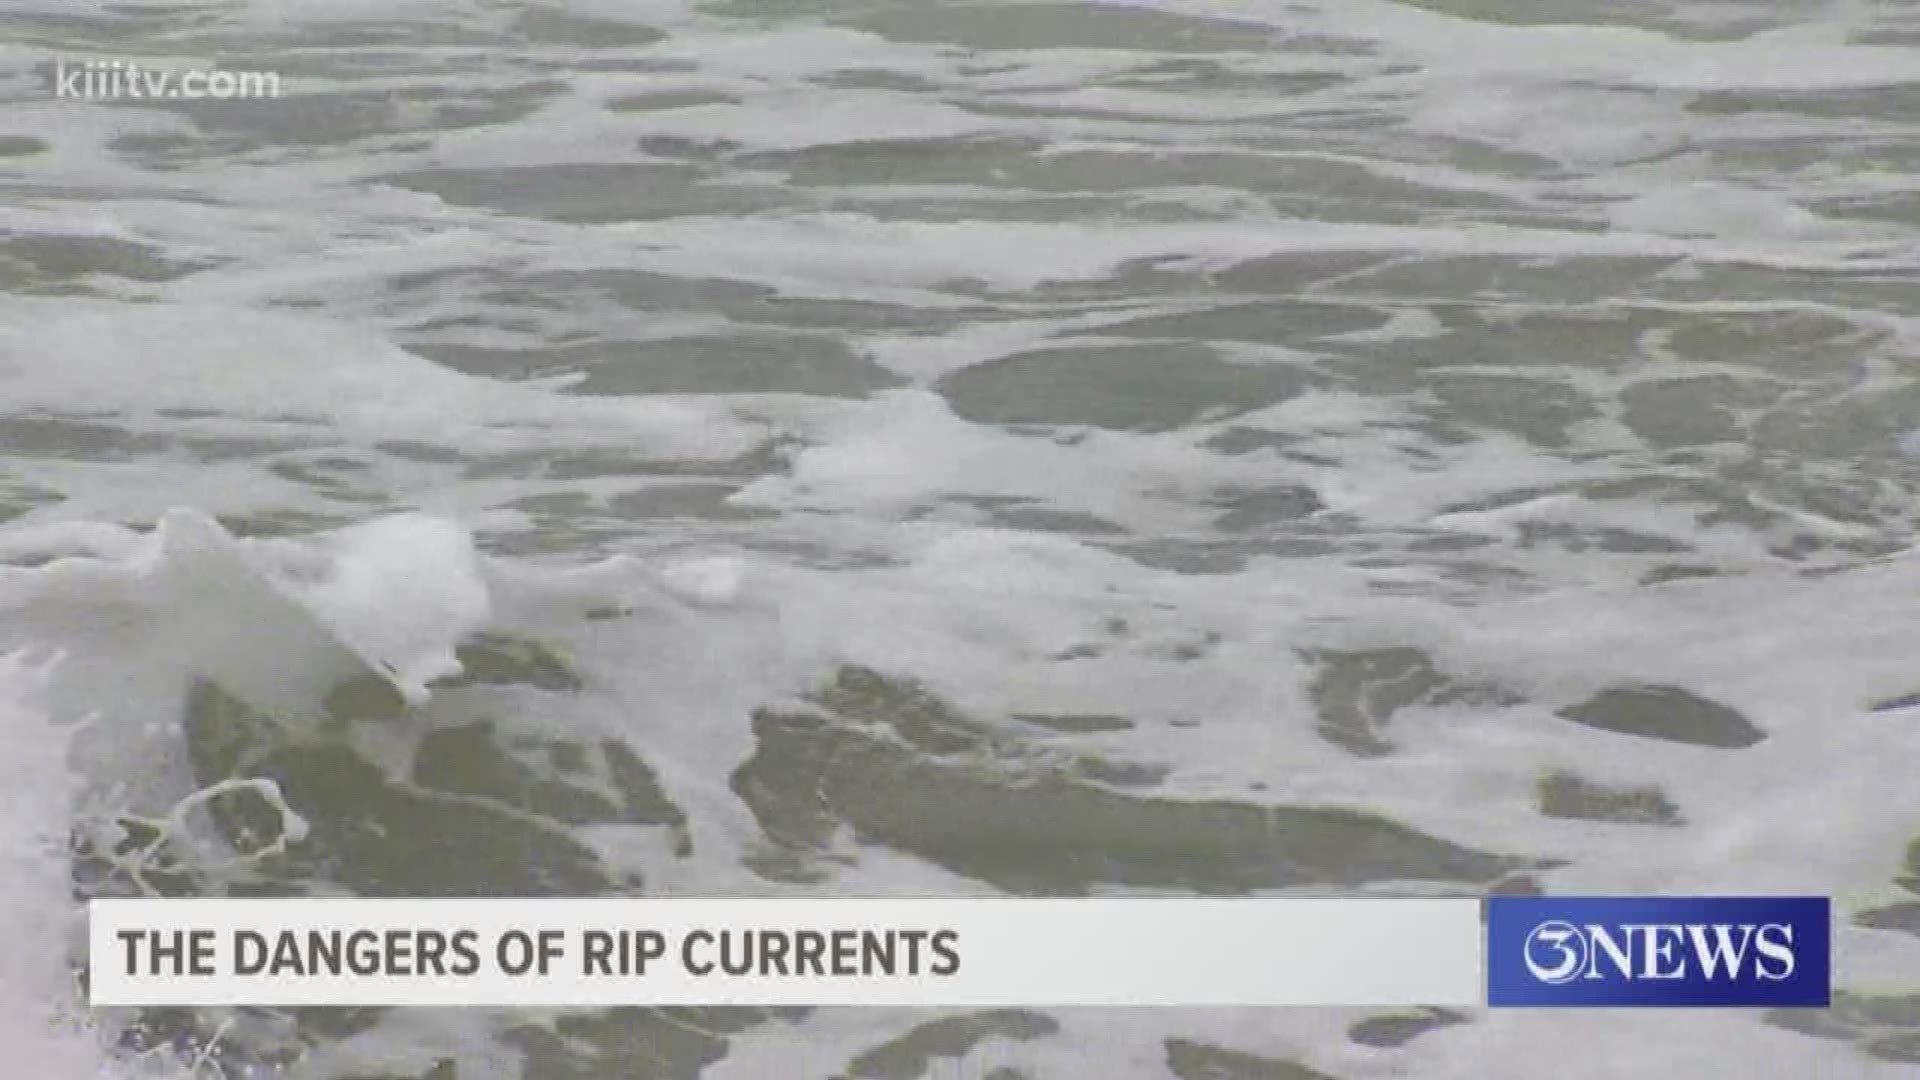 Experts warn people to watch out for rip currents during memorial day weekend